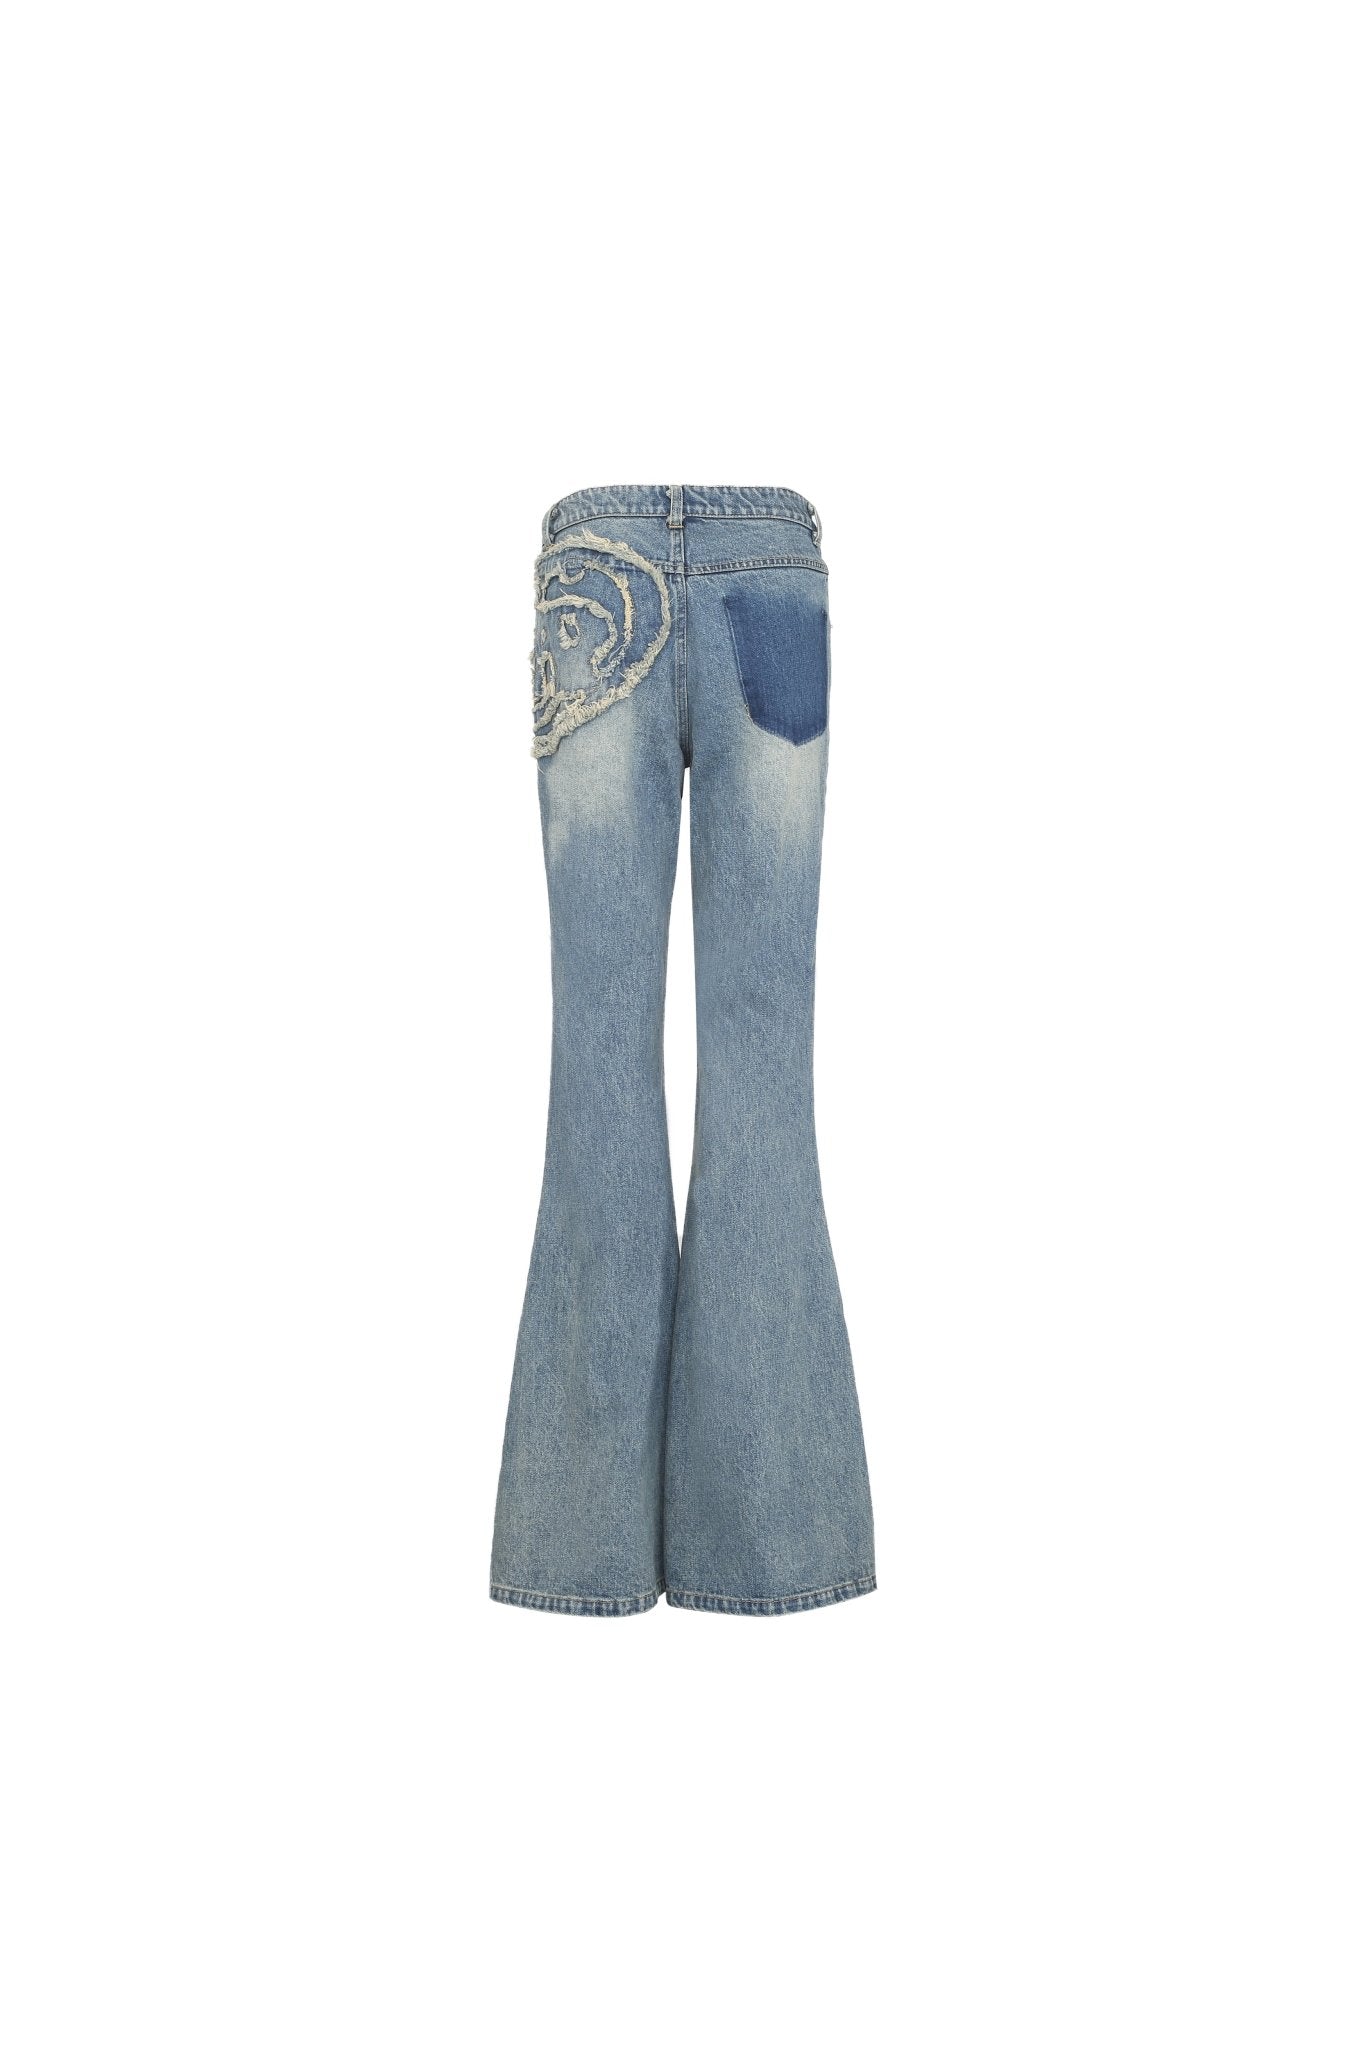 ANN ANDELMAN Bell Bottoms Jeans Blue | MADA IN CHINA